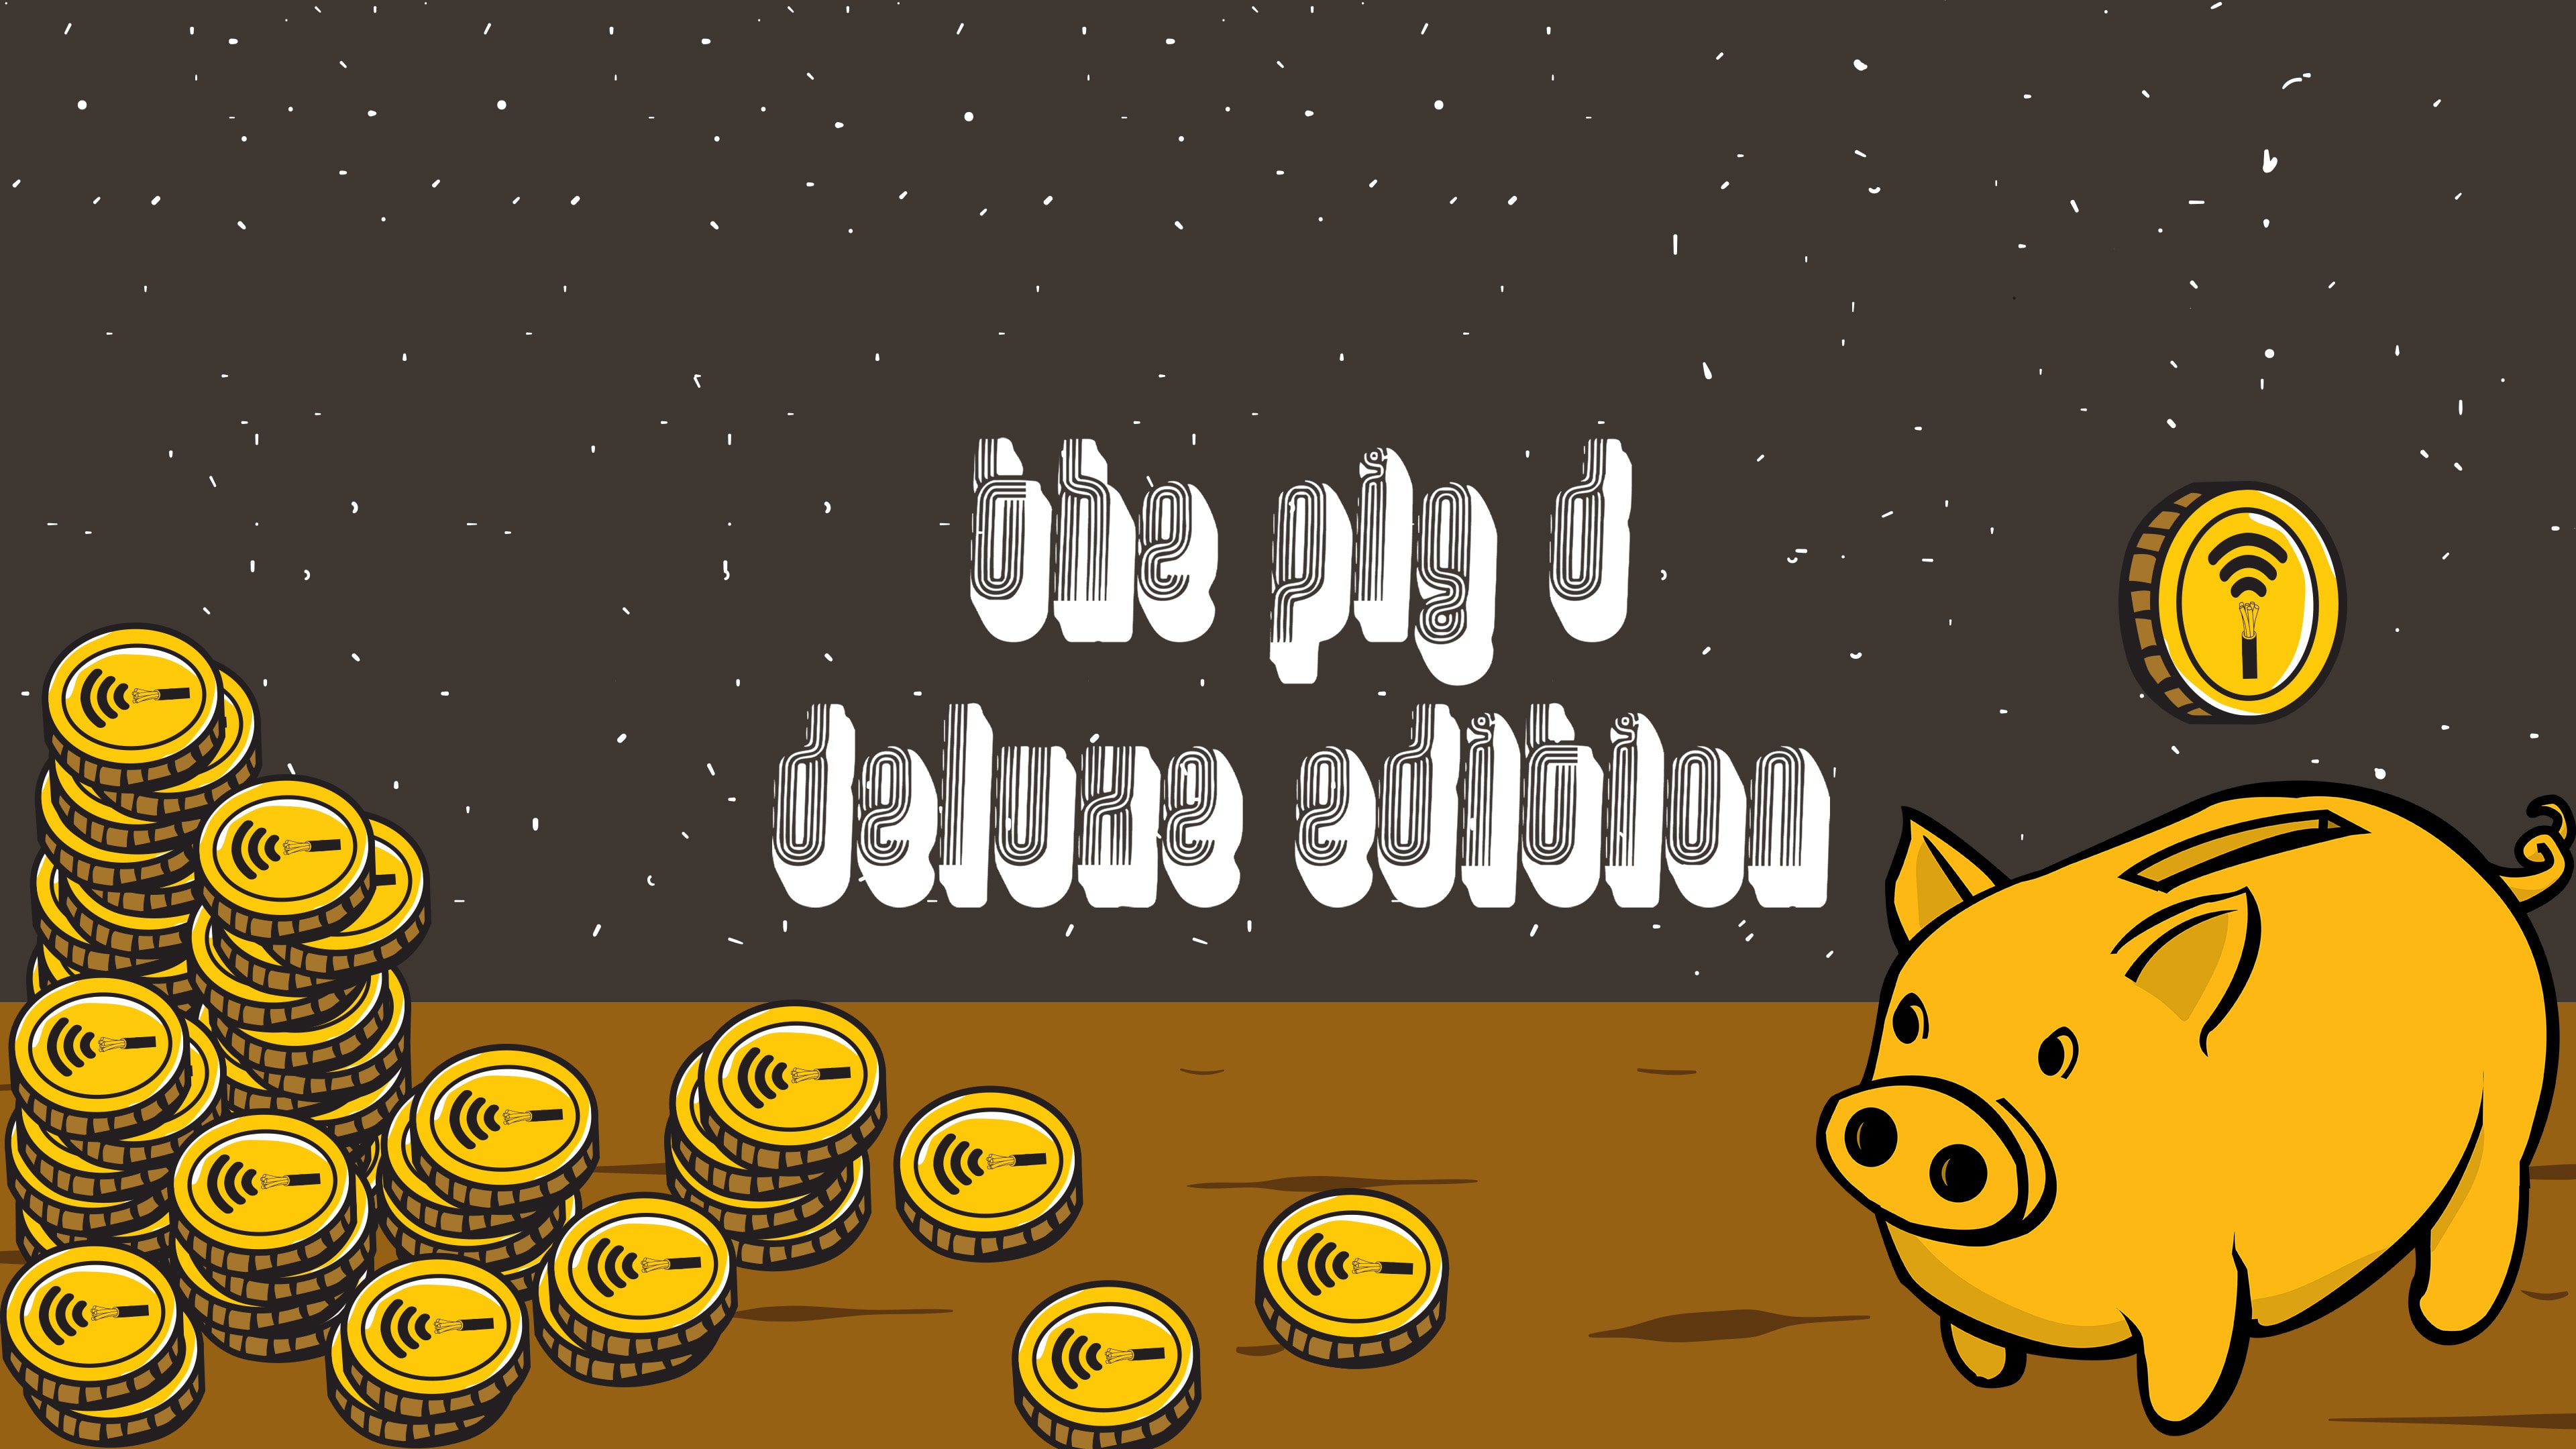 The Pig D Deluxe Edition